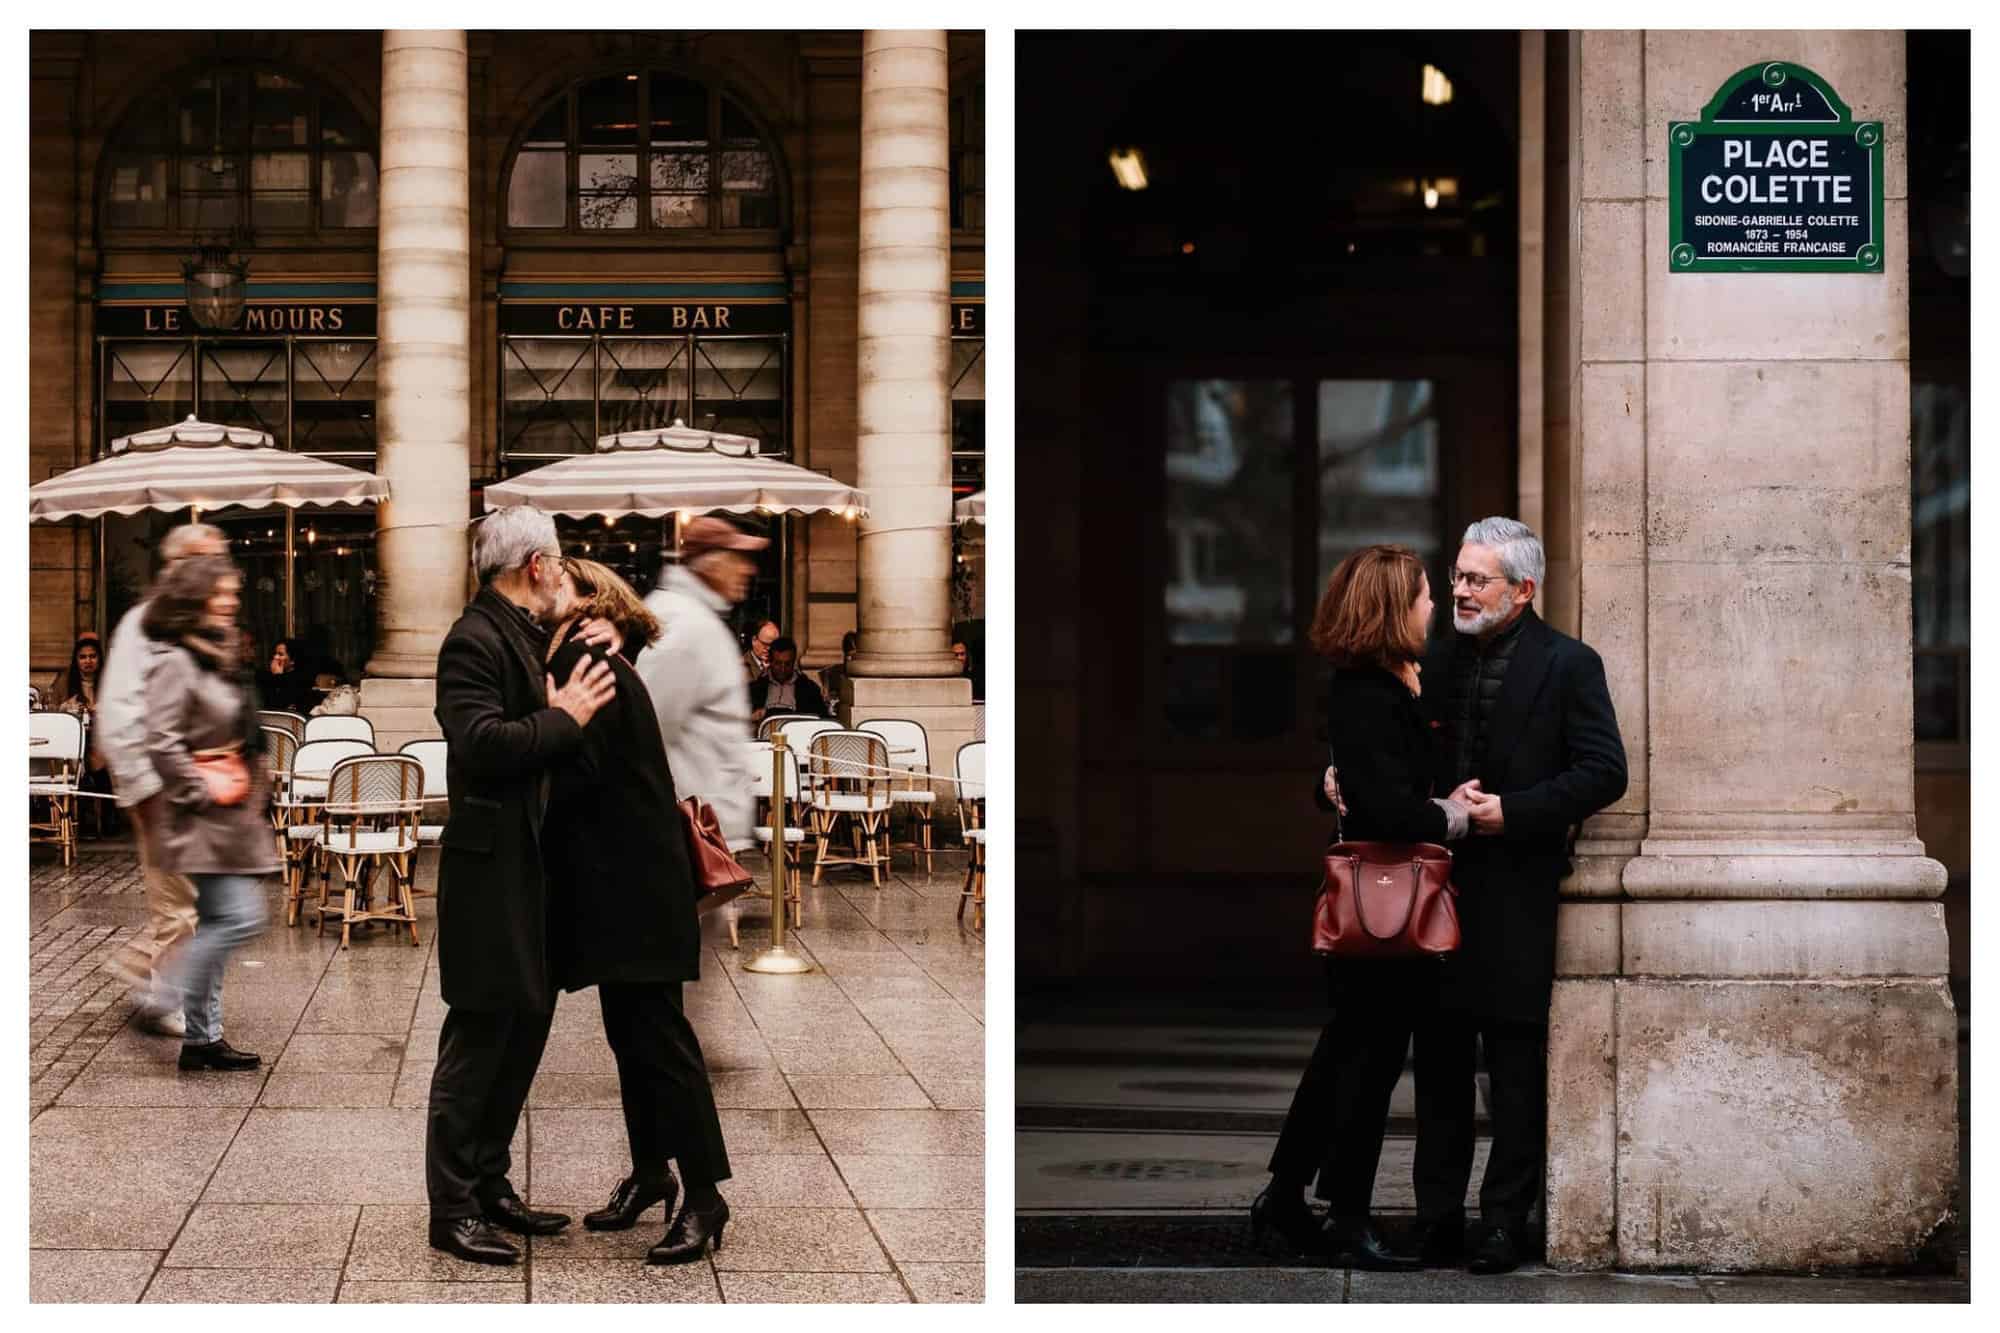 Right: A man and woman in black share a kiss in front of a Parisian café. Left: A man and woman in black are embracing each other beside a Parisian beige pillar.